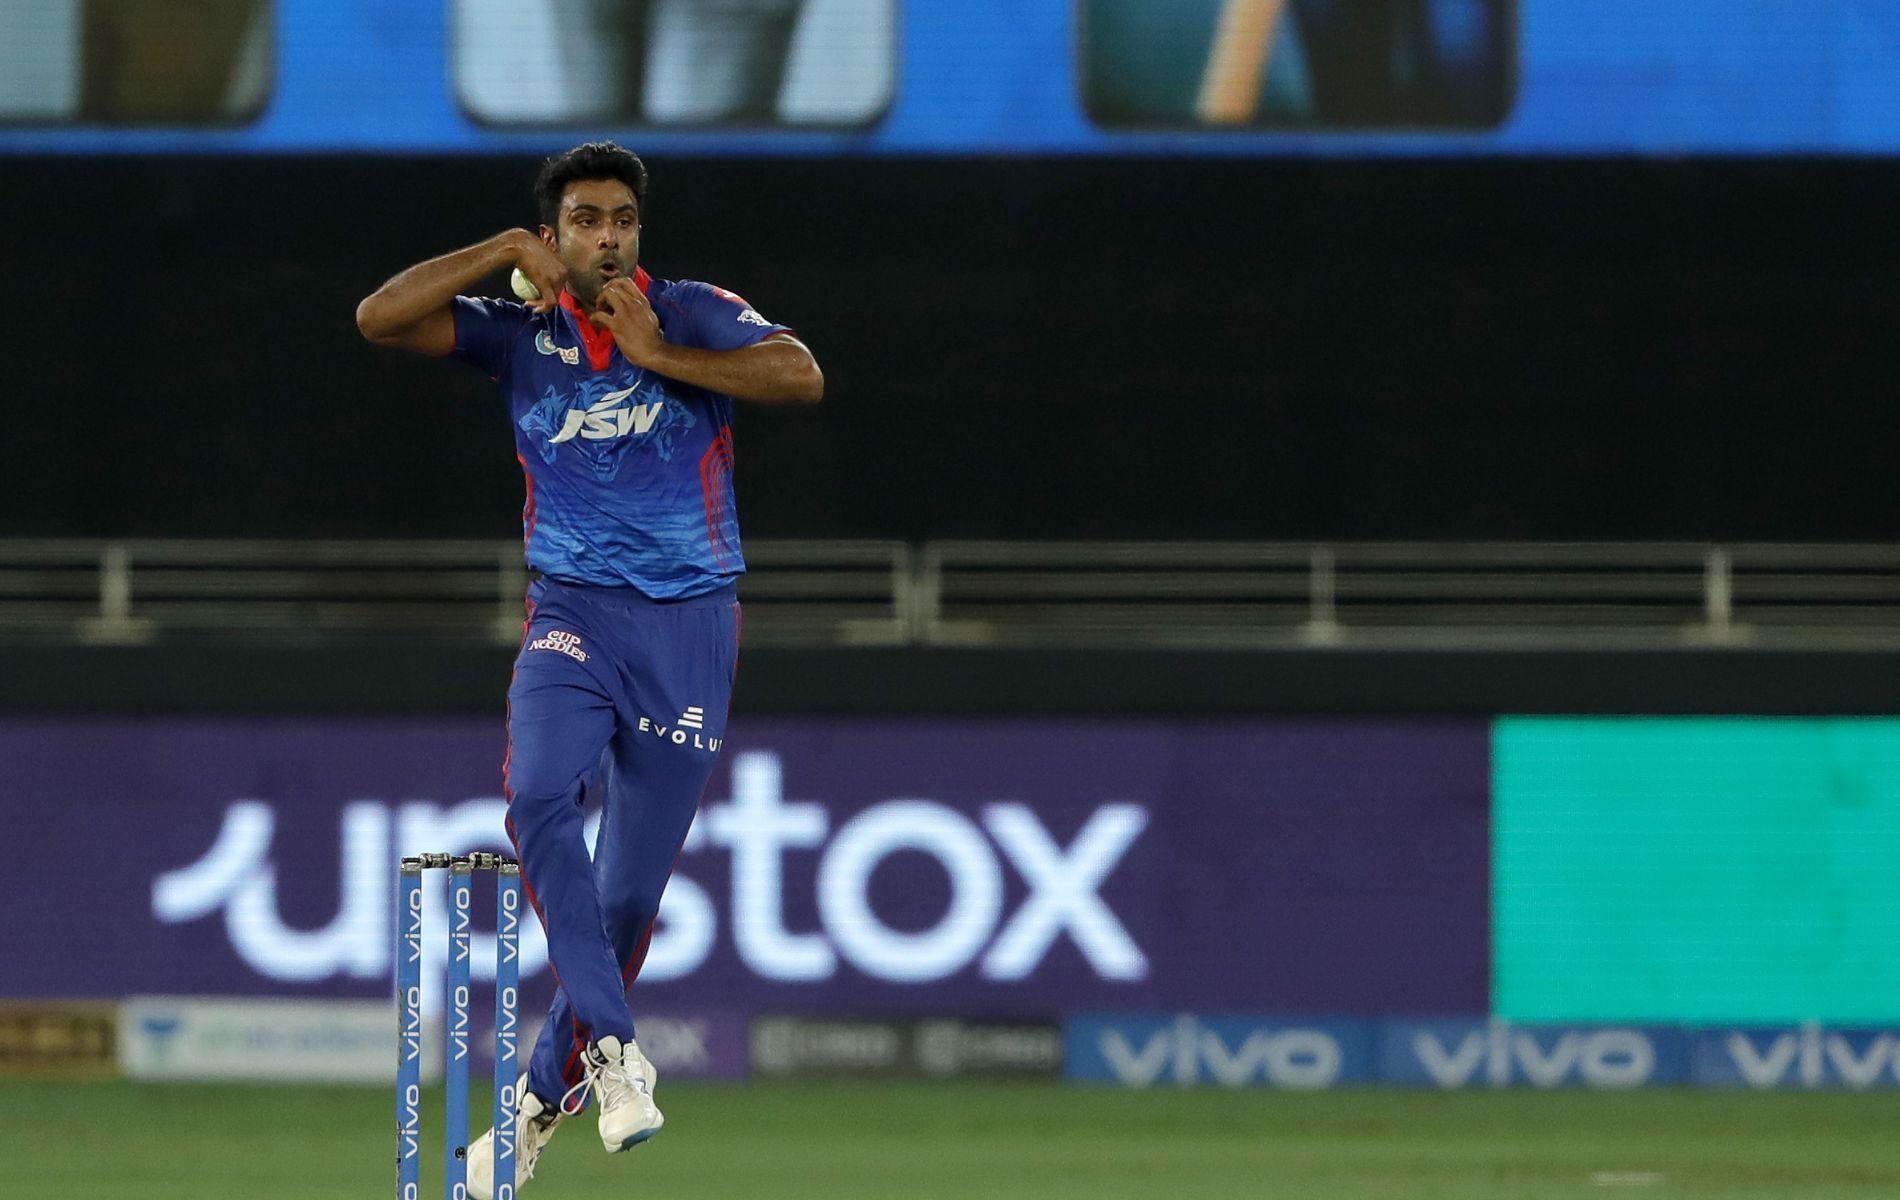 Ravichandran Ashwin brings a wealth of experience to the table.